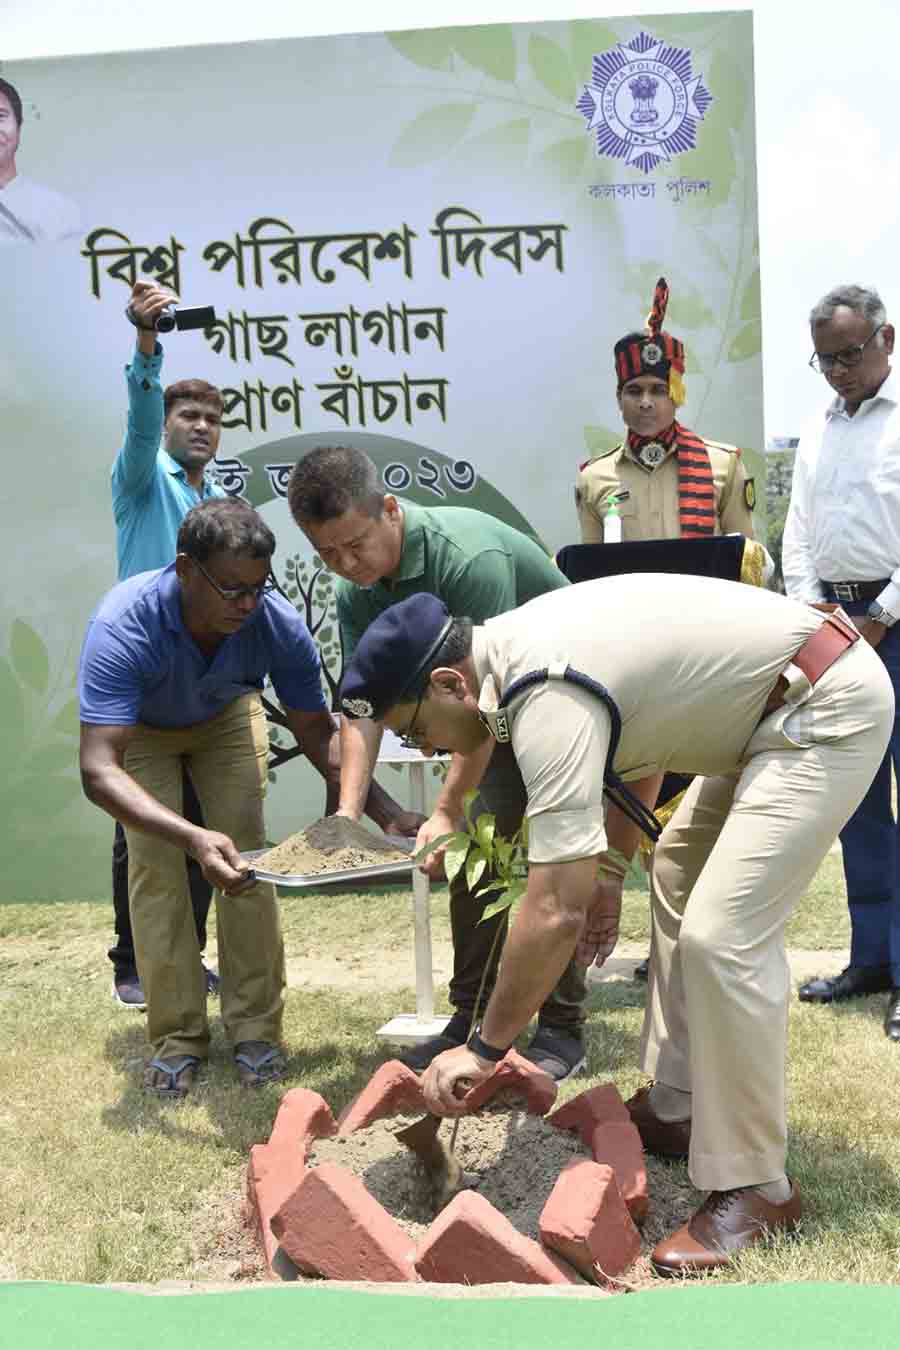 On the occasion of World Environment Day a sapling plantation drive was undertaken by commissioner of police, Kolkata and other senior officers at the Bodyguard Lines, Alipore  